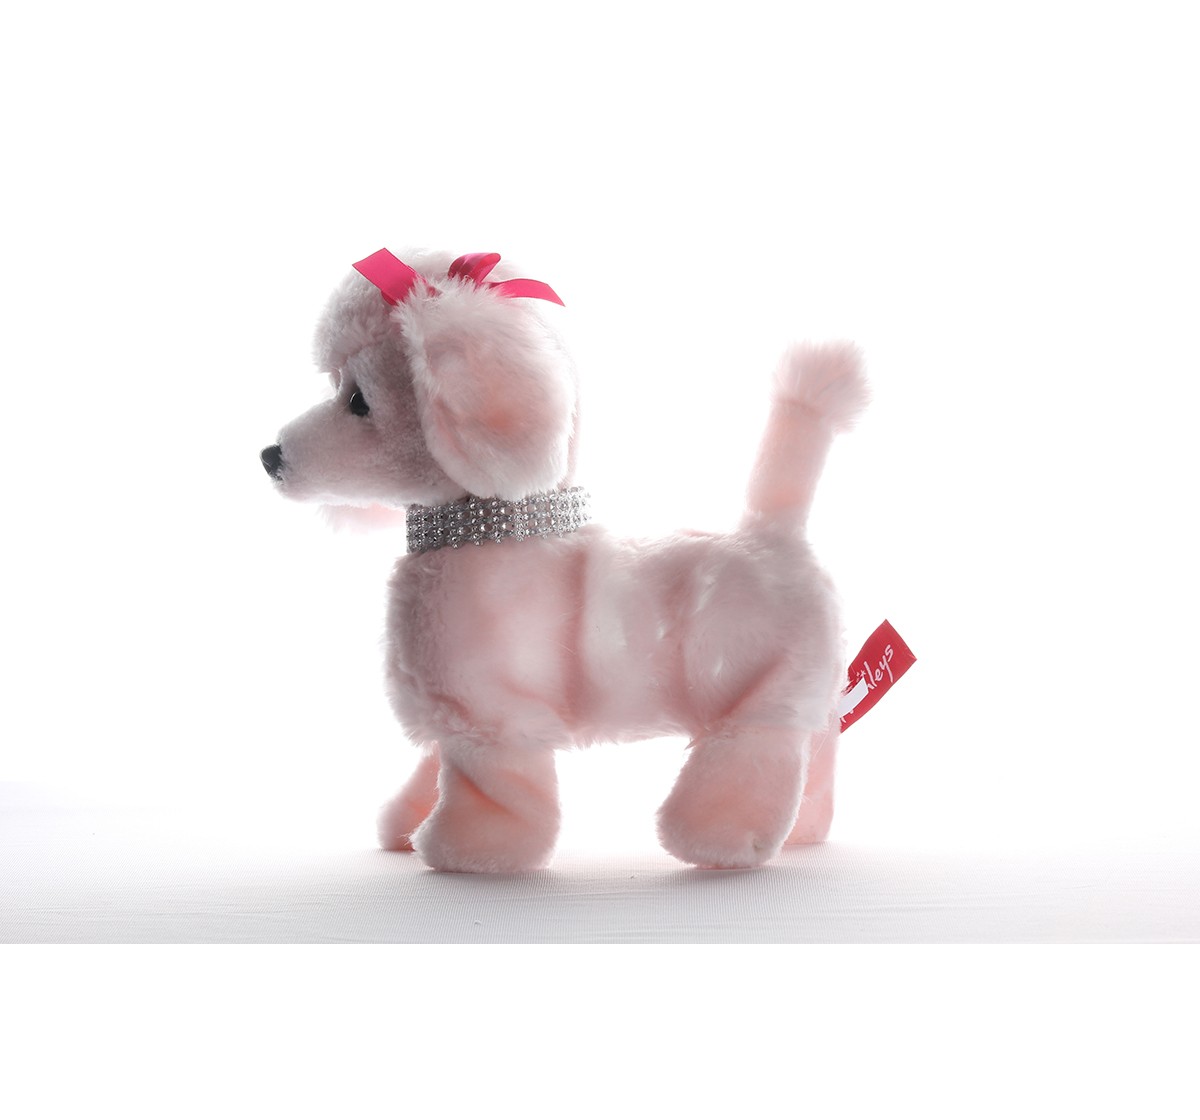  Hamleys Movers & Shakers - Pink Poodle Interactive Soft Toys for Kids age 2Y+ - 5 Cm (Pink)